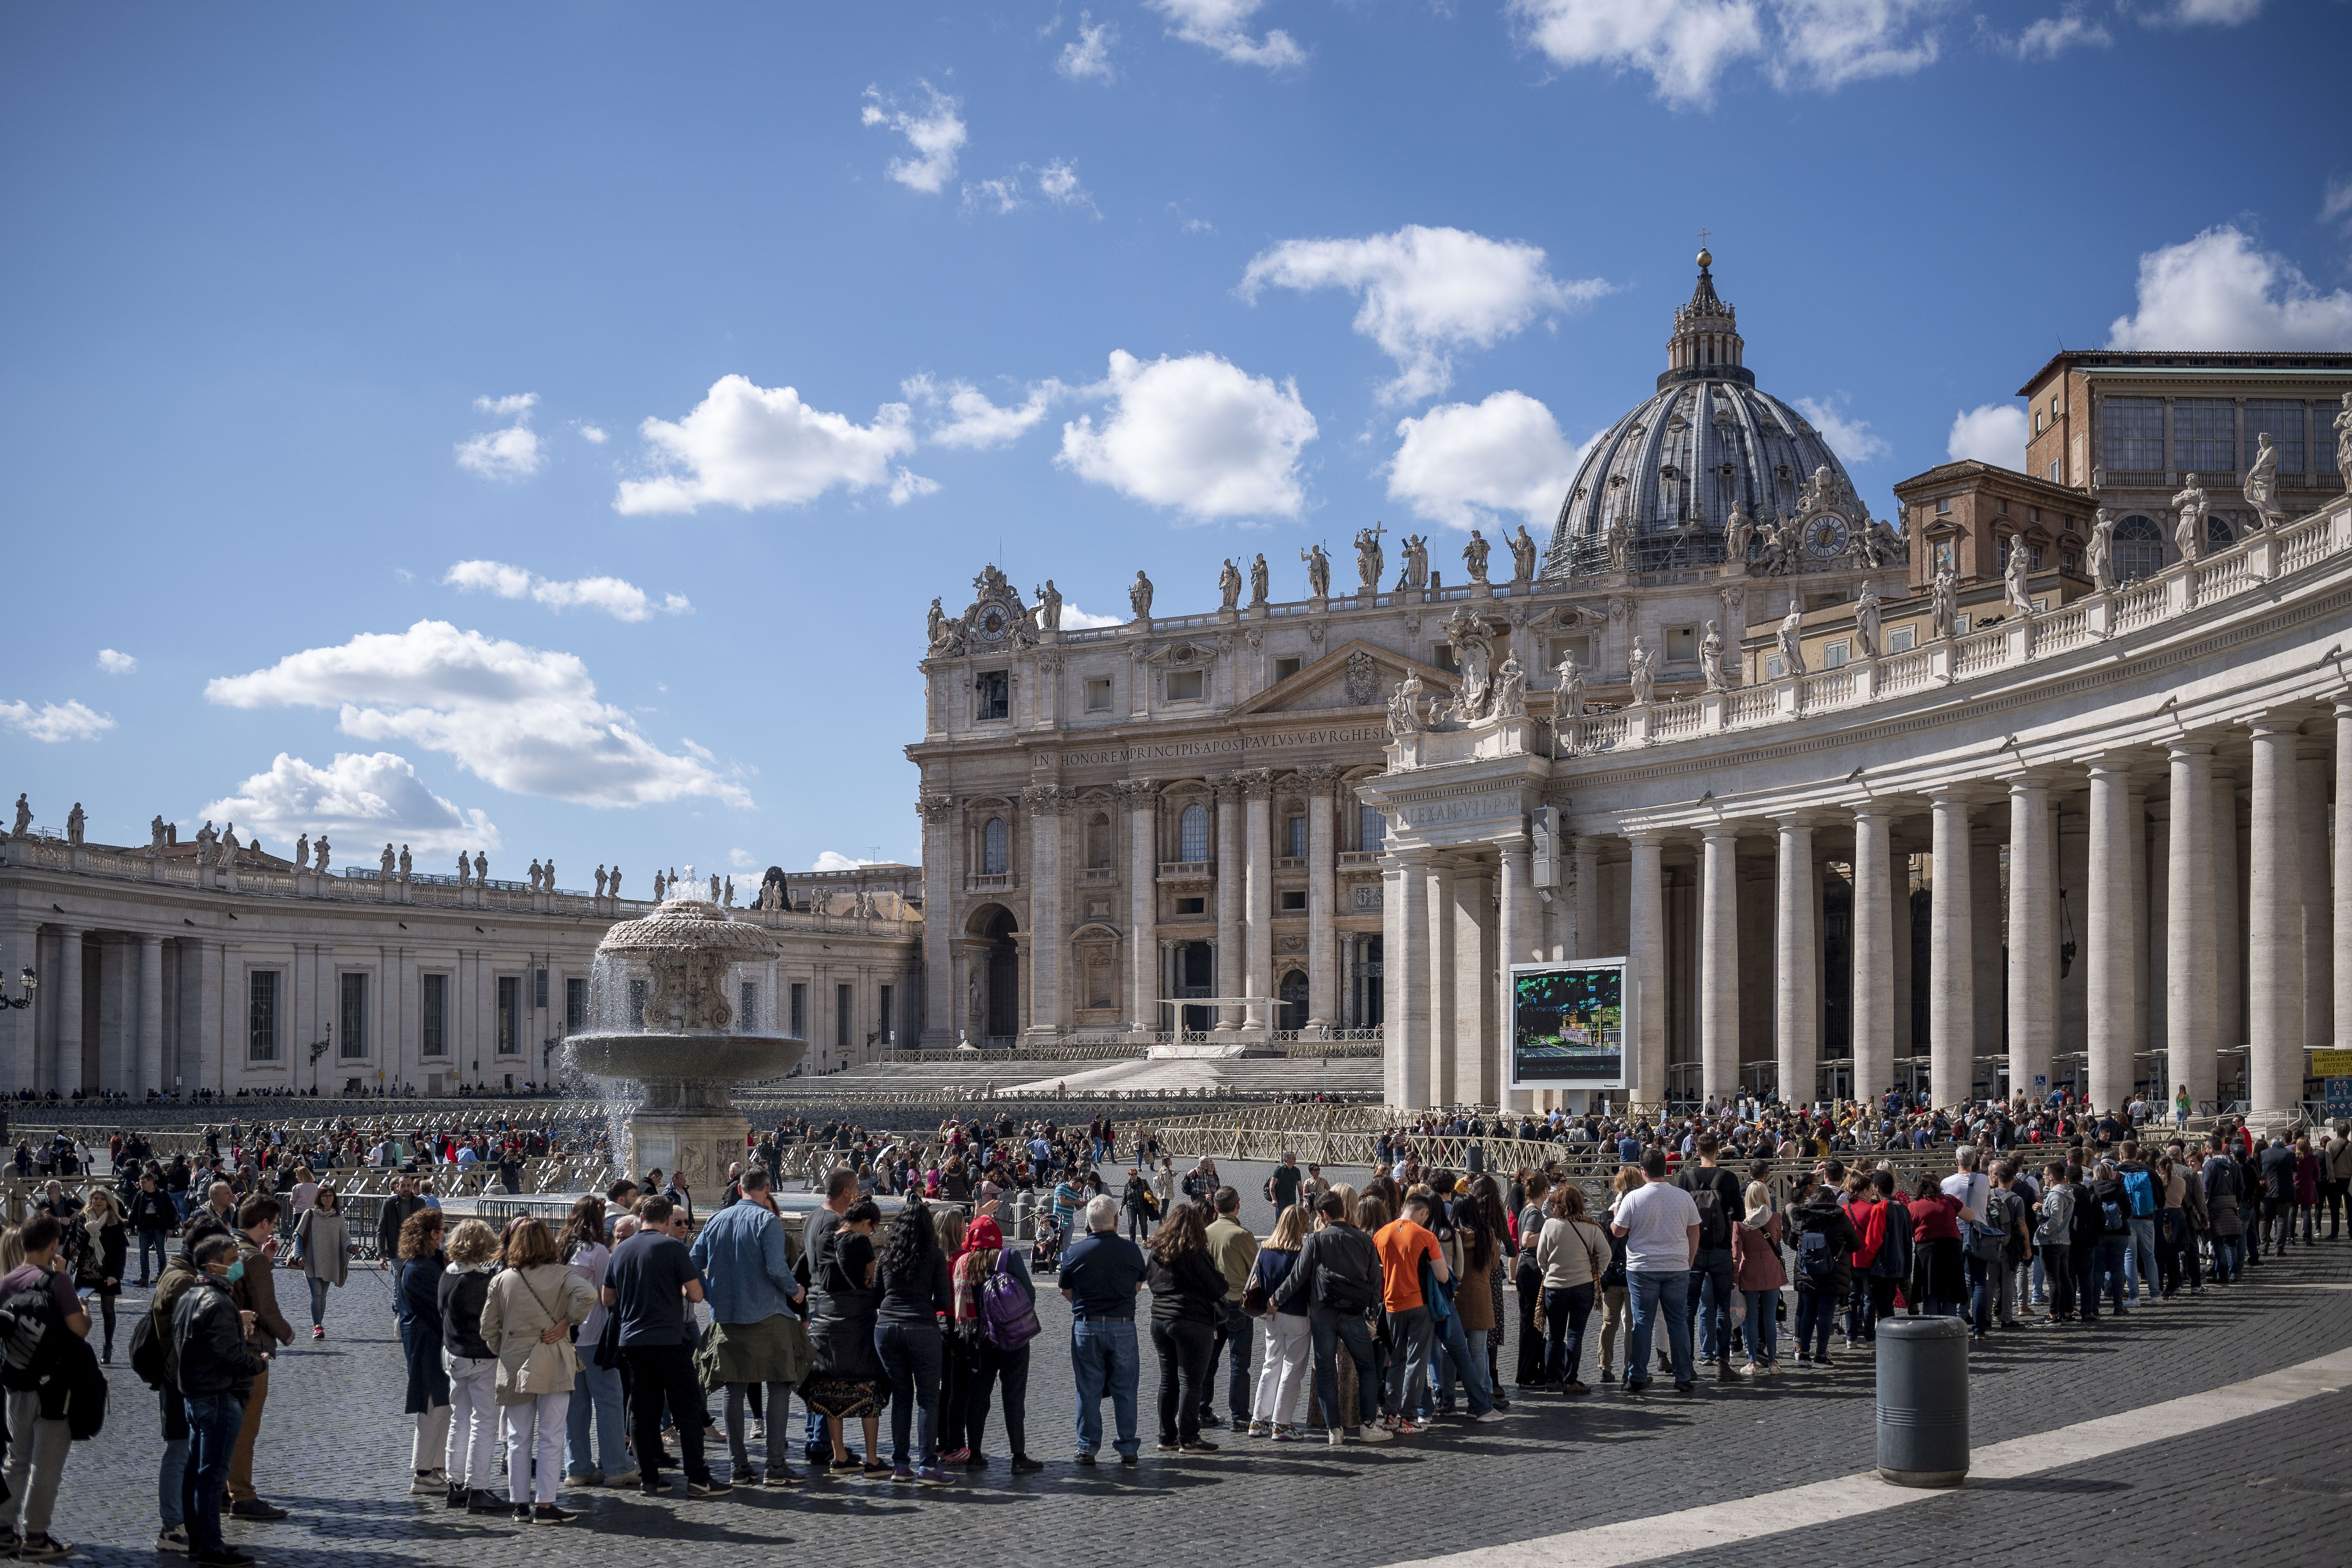 A small crowd gathered in St. Peter's Square